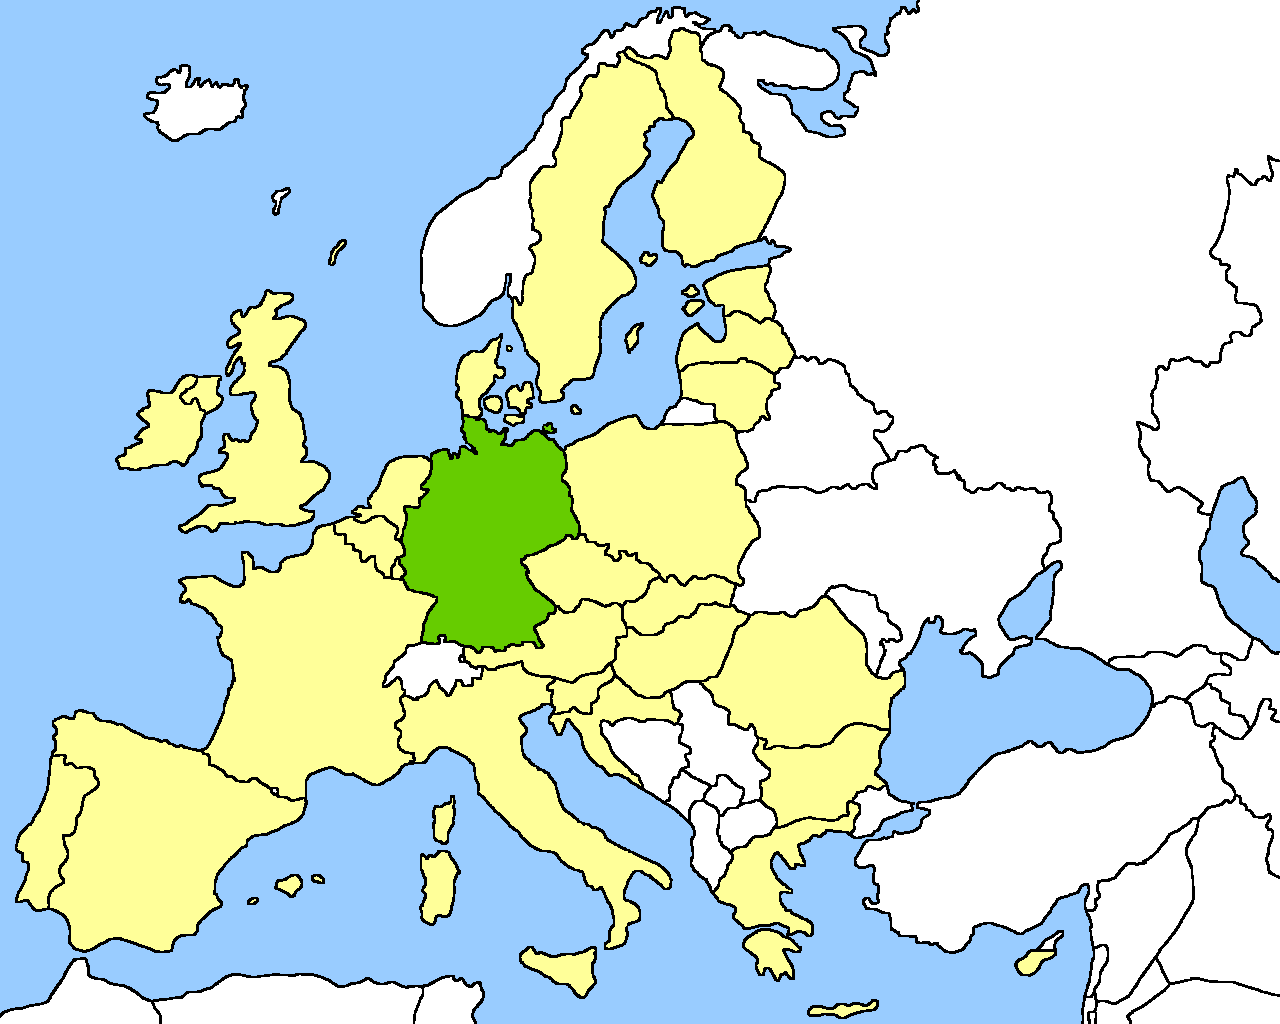 Location map, Germany in the EU